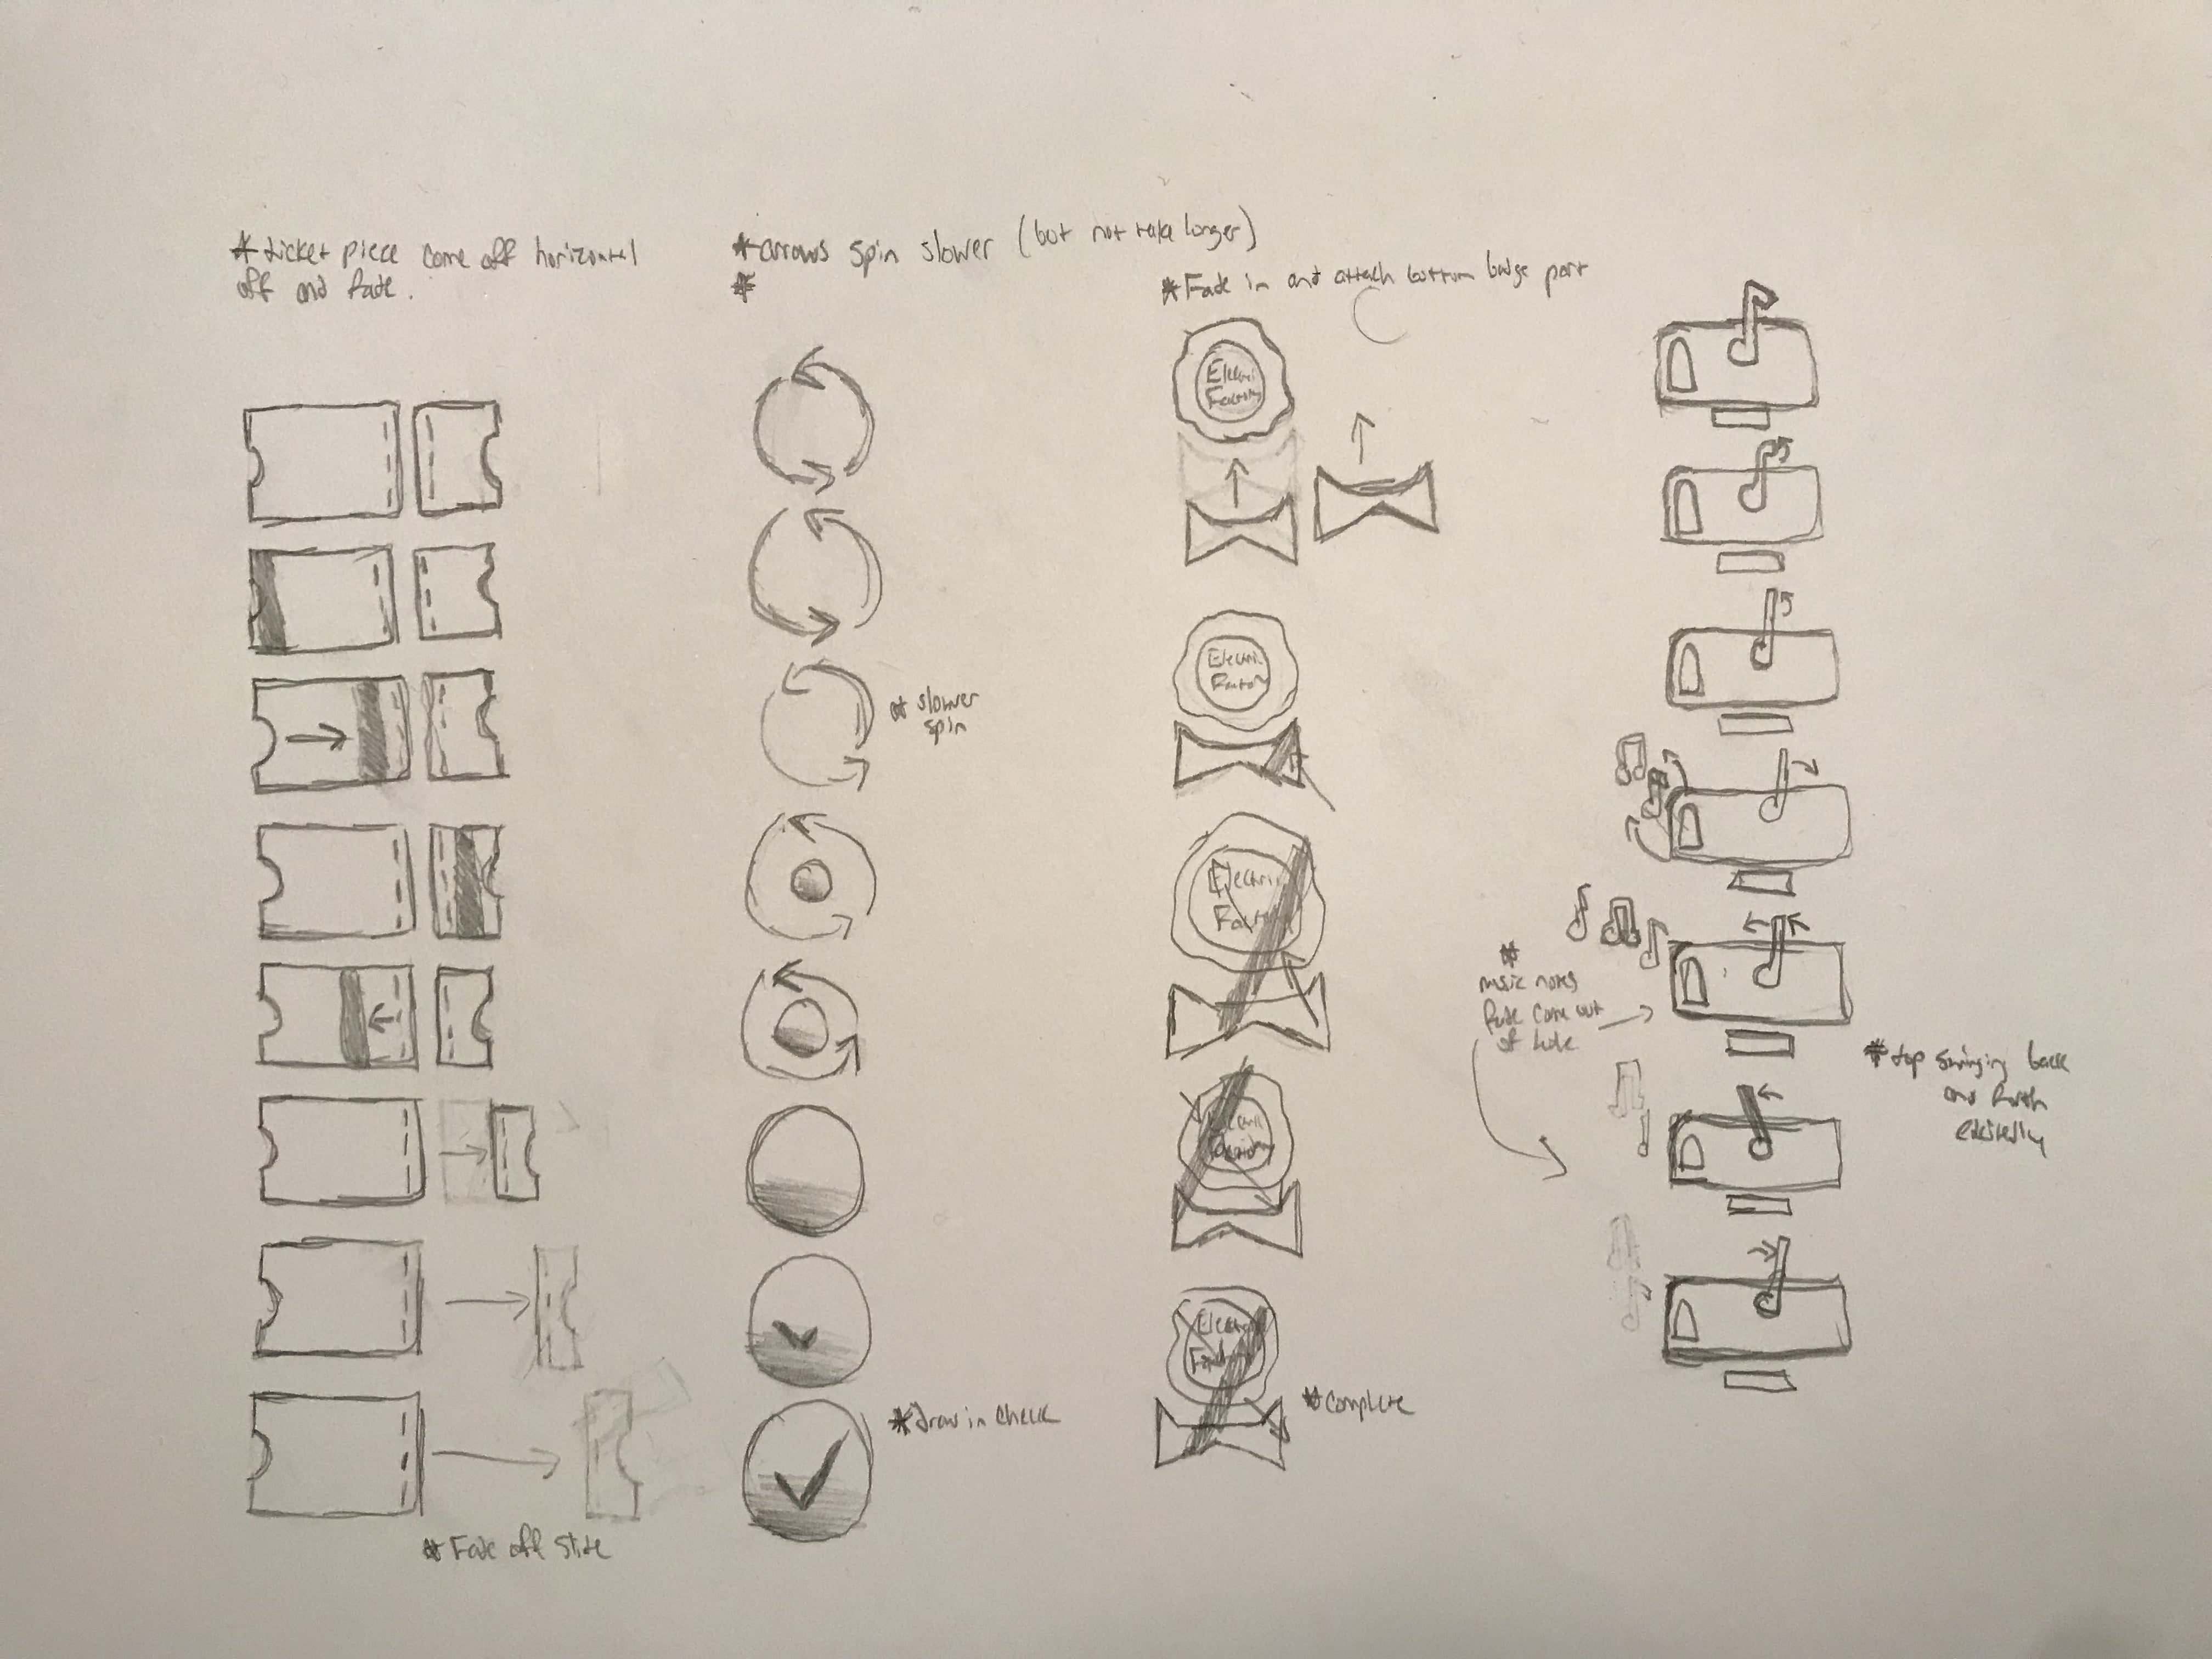 Static Image of Microinteraction Pencil and Paper Sketches